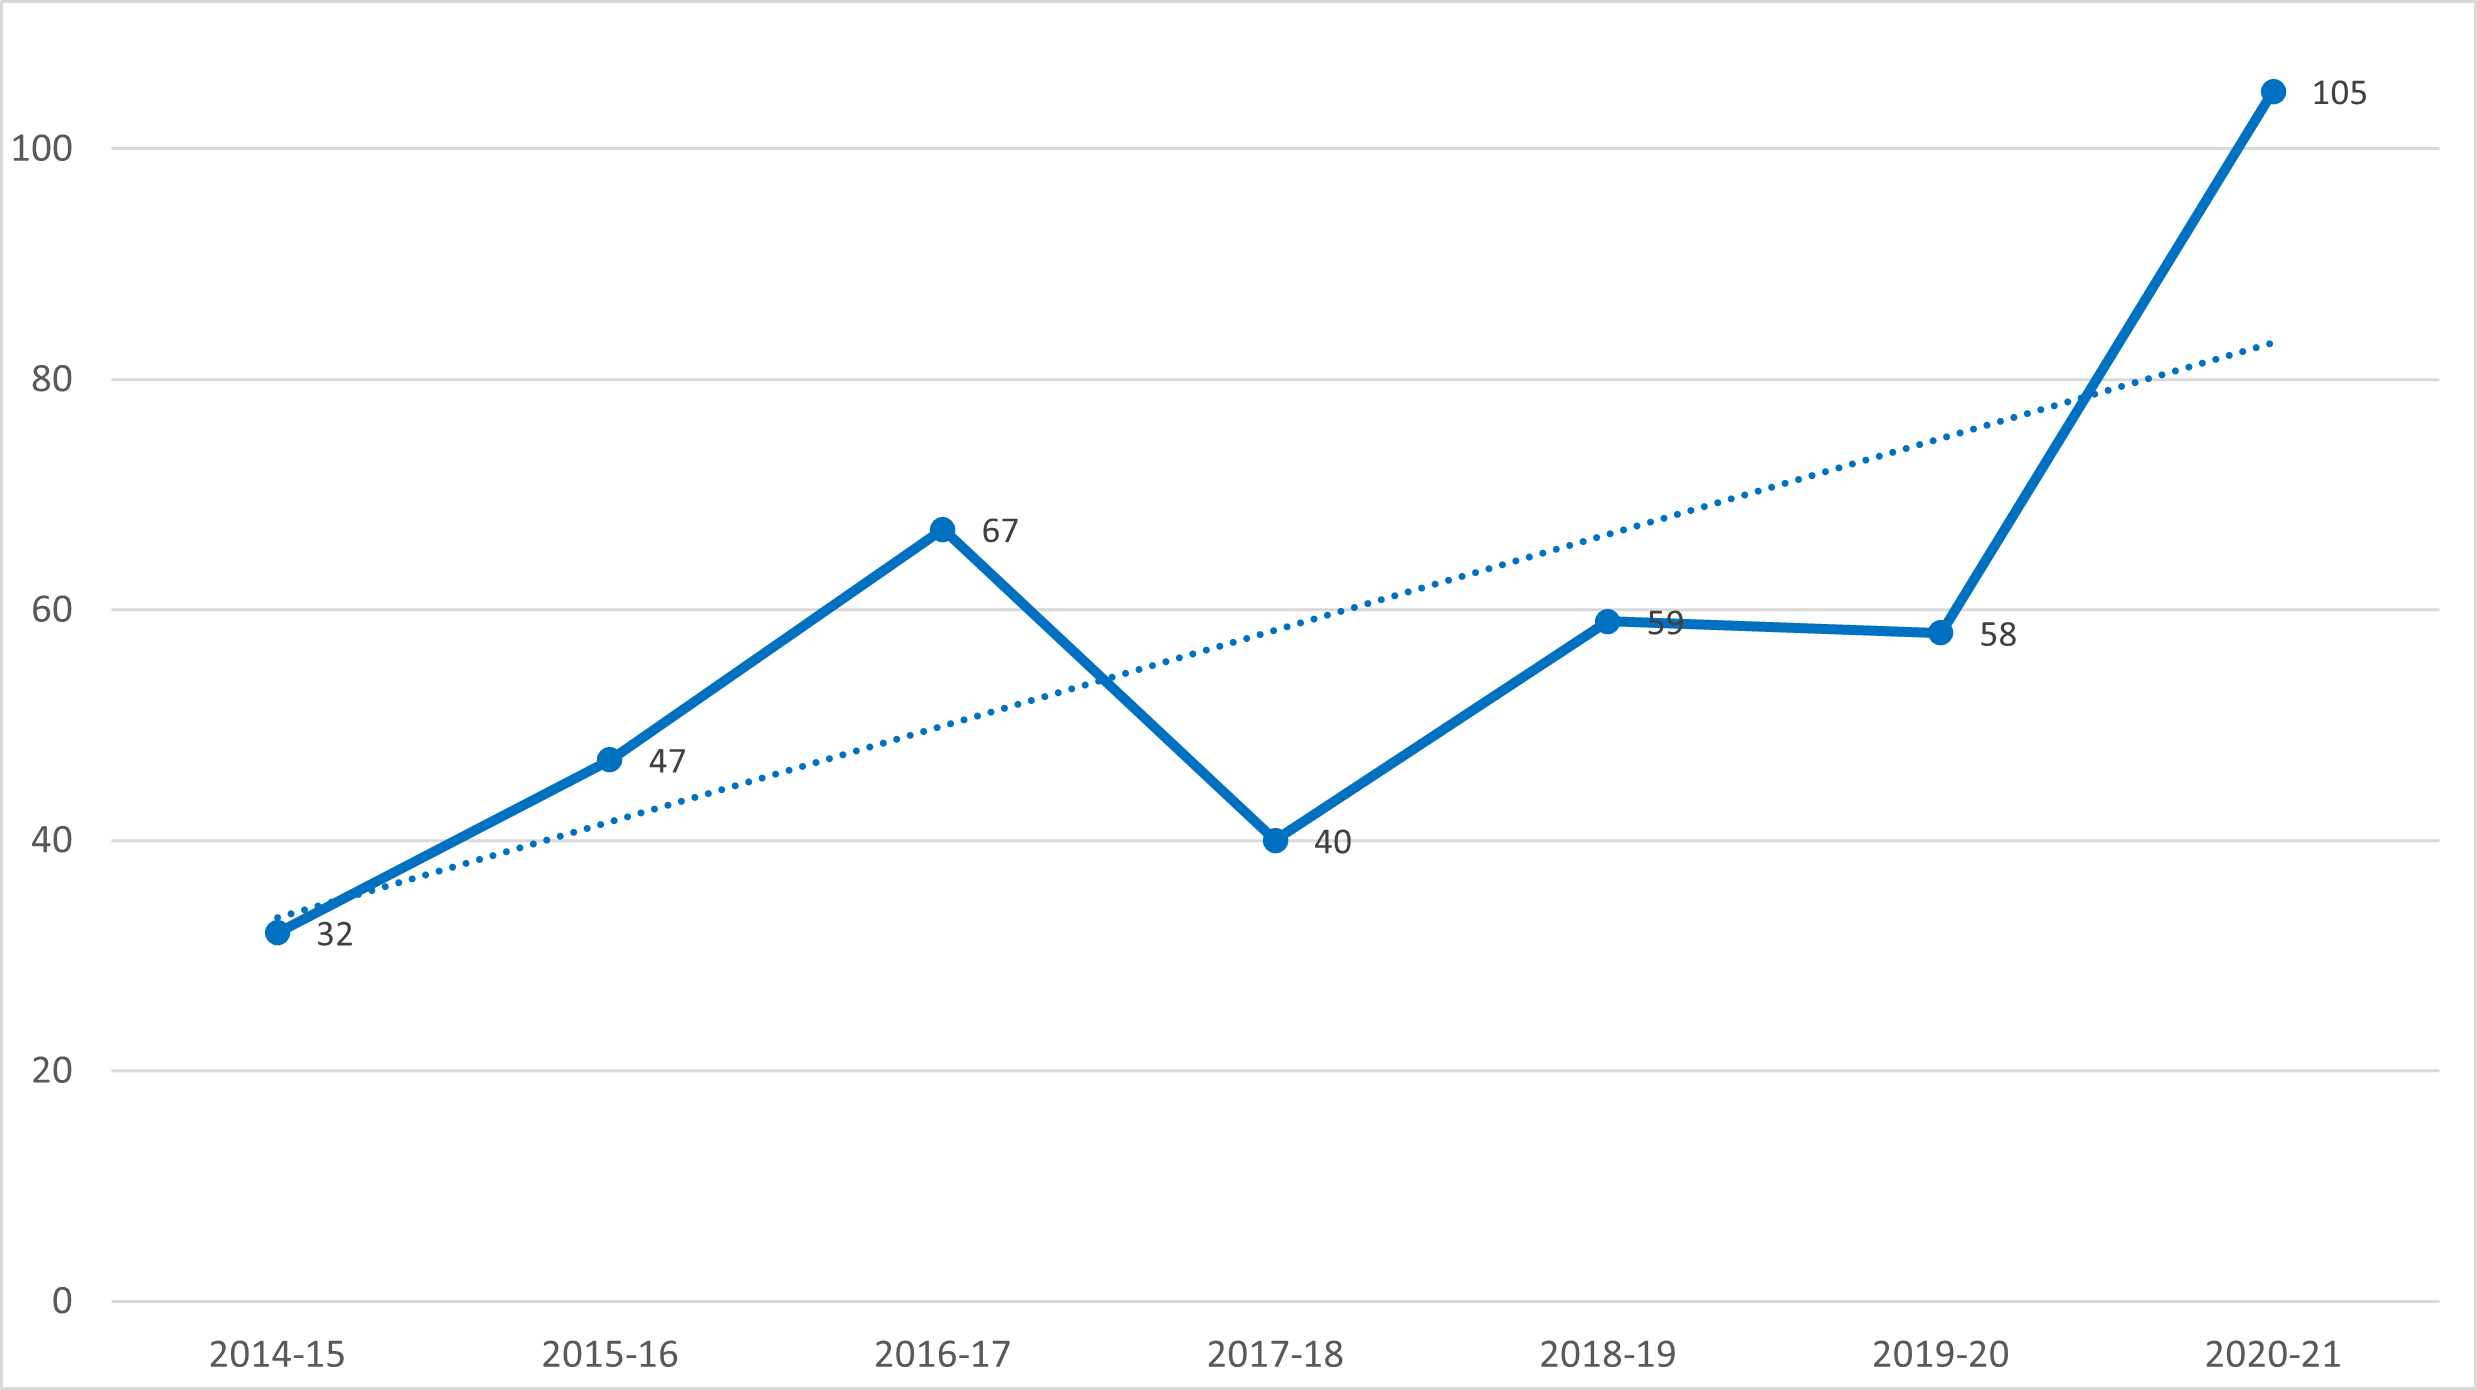 Figure 1. Number of ACAP applications received, 2014-15 to 2020-21